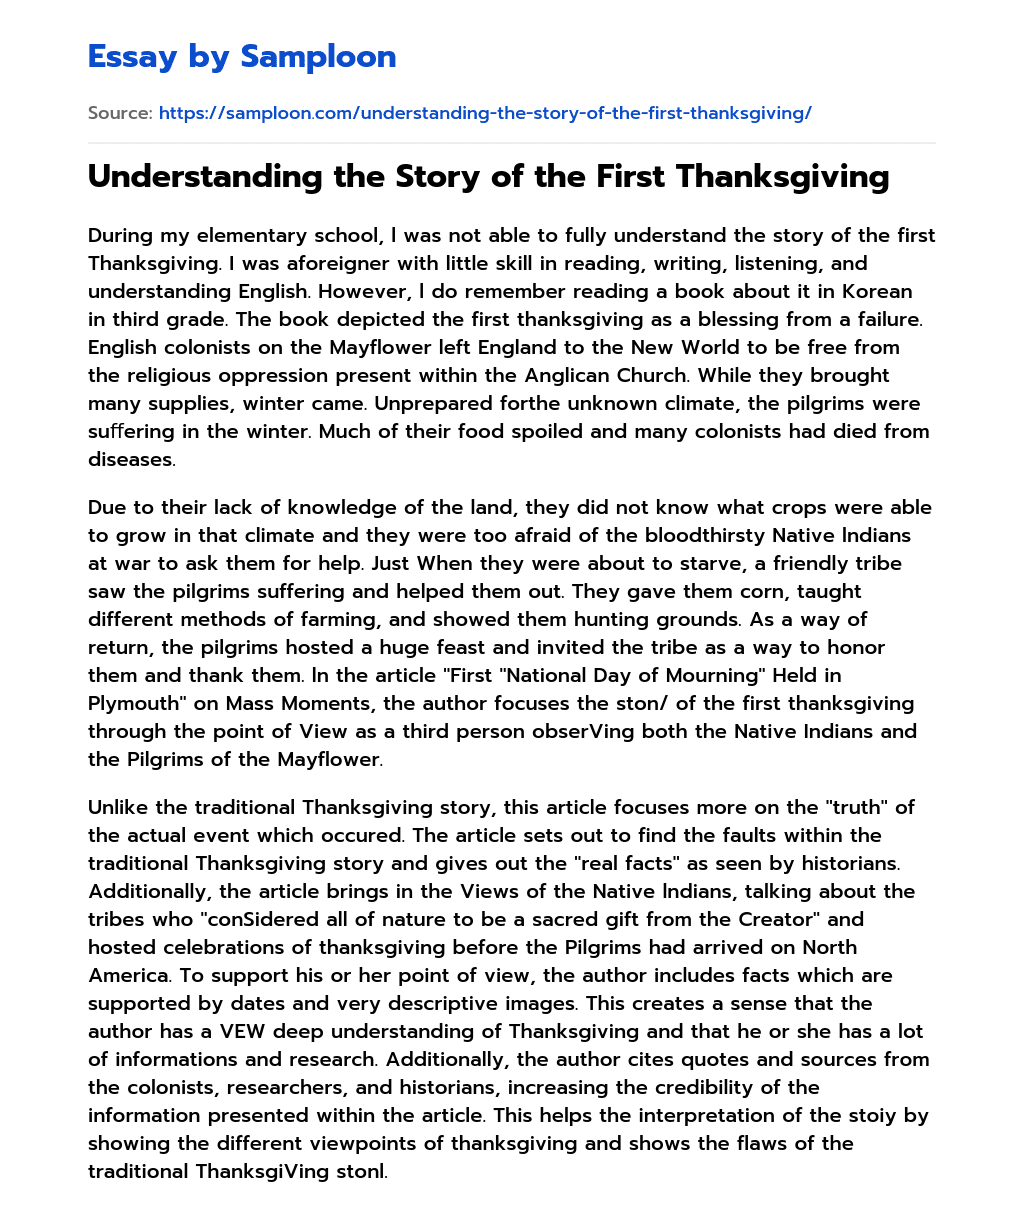 Understanding the Story of the First Thanksgiving essay